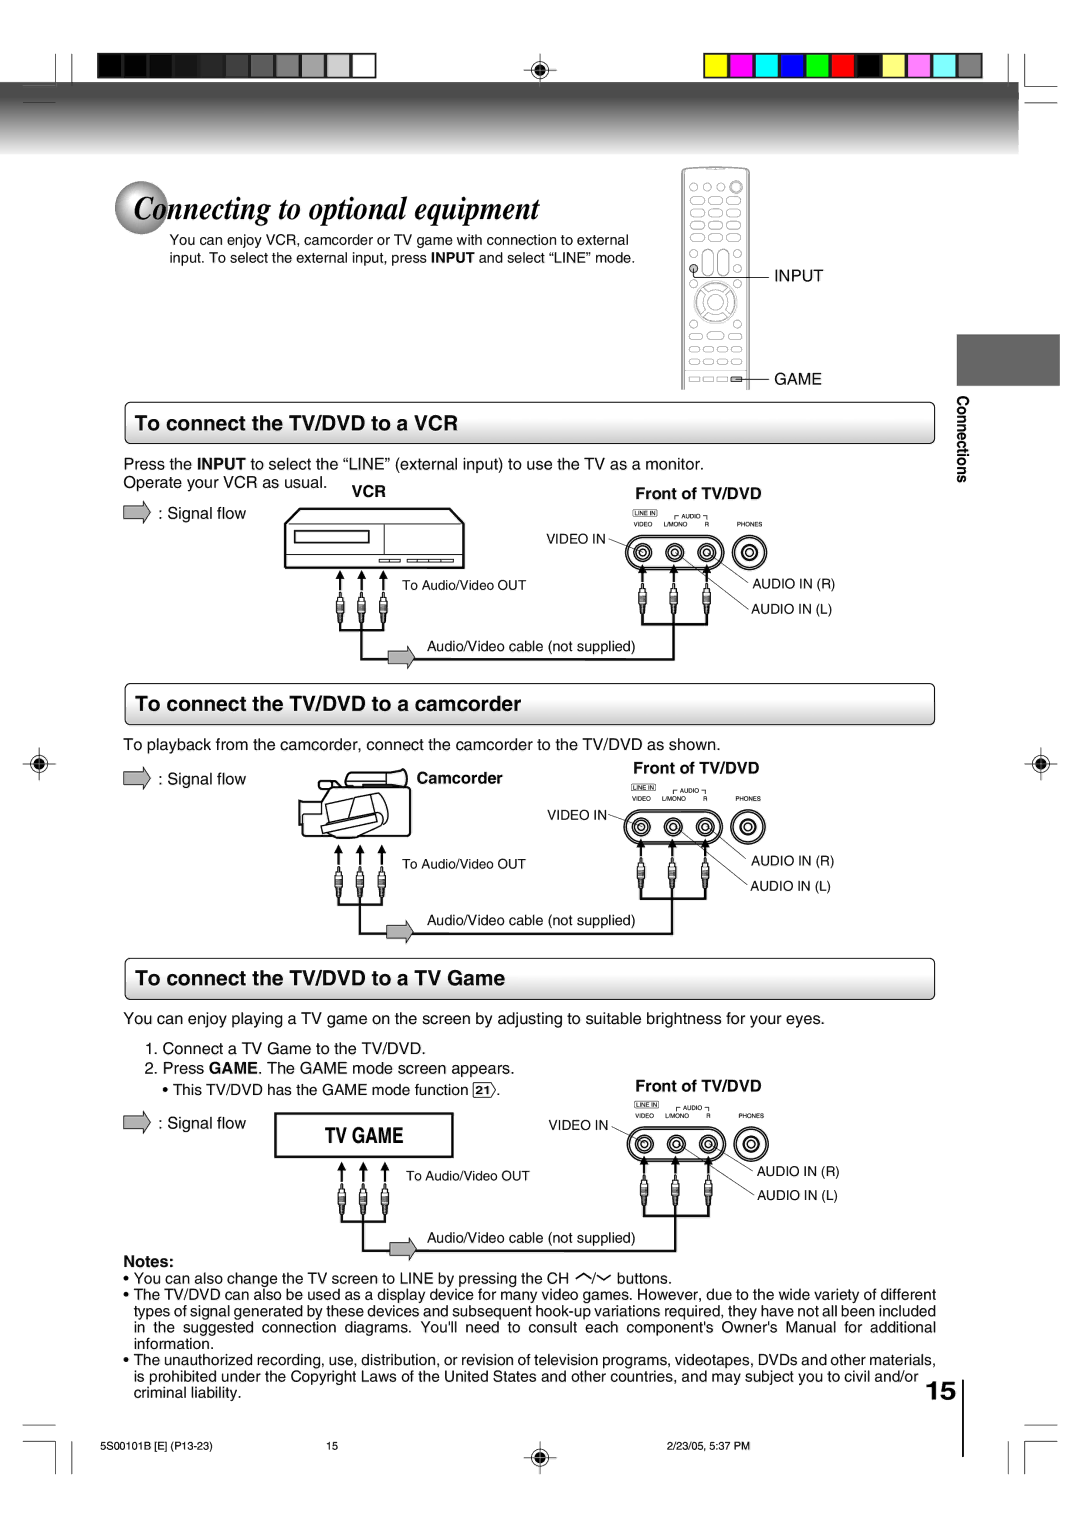 Toshiba MD14F51 owner manual Connecting to optional equipment, To connect the TV/DVD to a VCR 